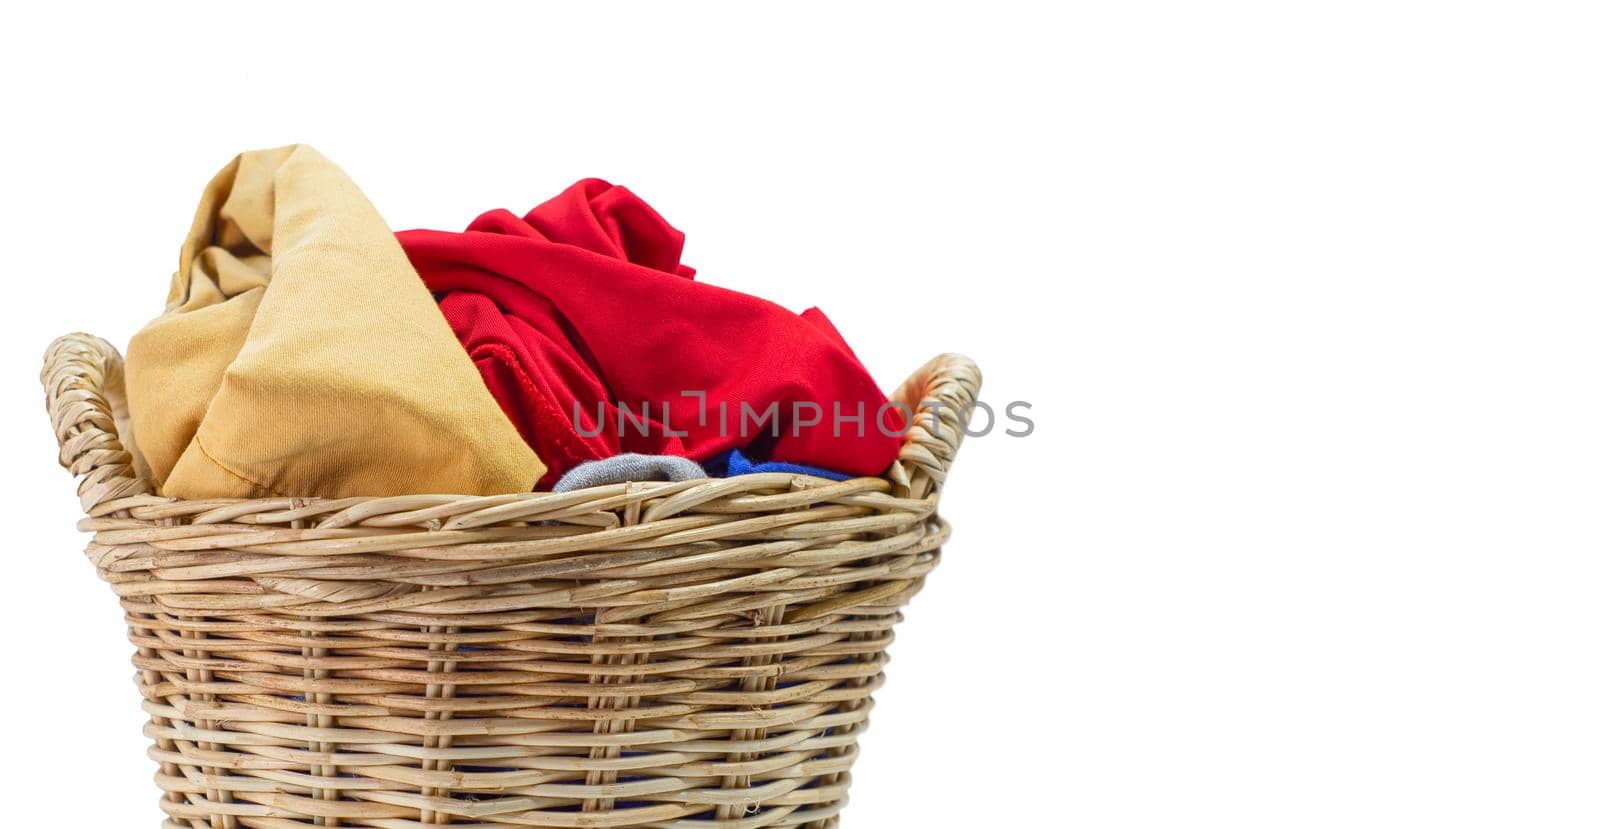 Clothes in a laundry wicker basket isolated on white background. by Buttus_casso